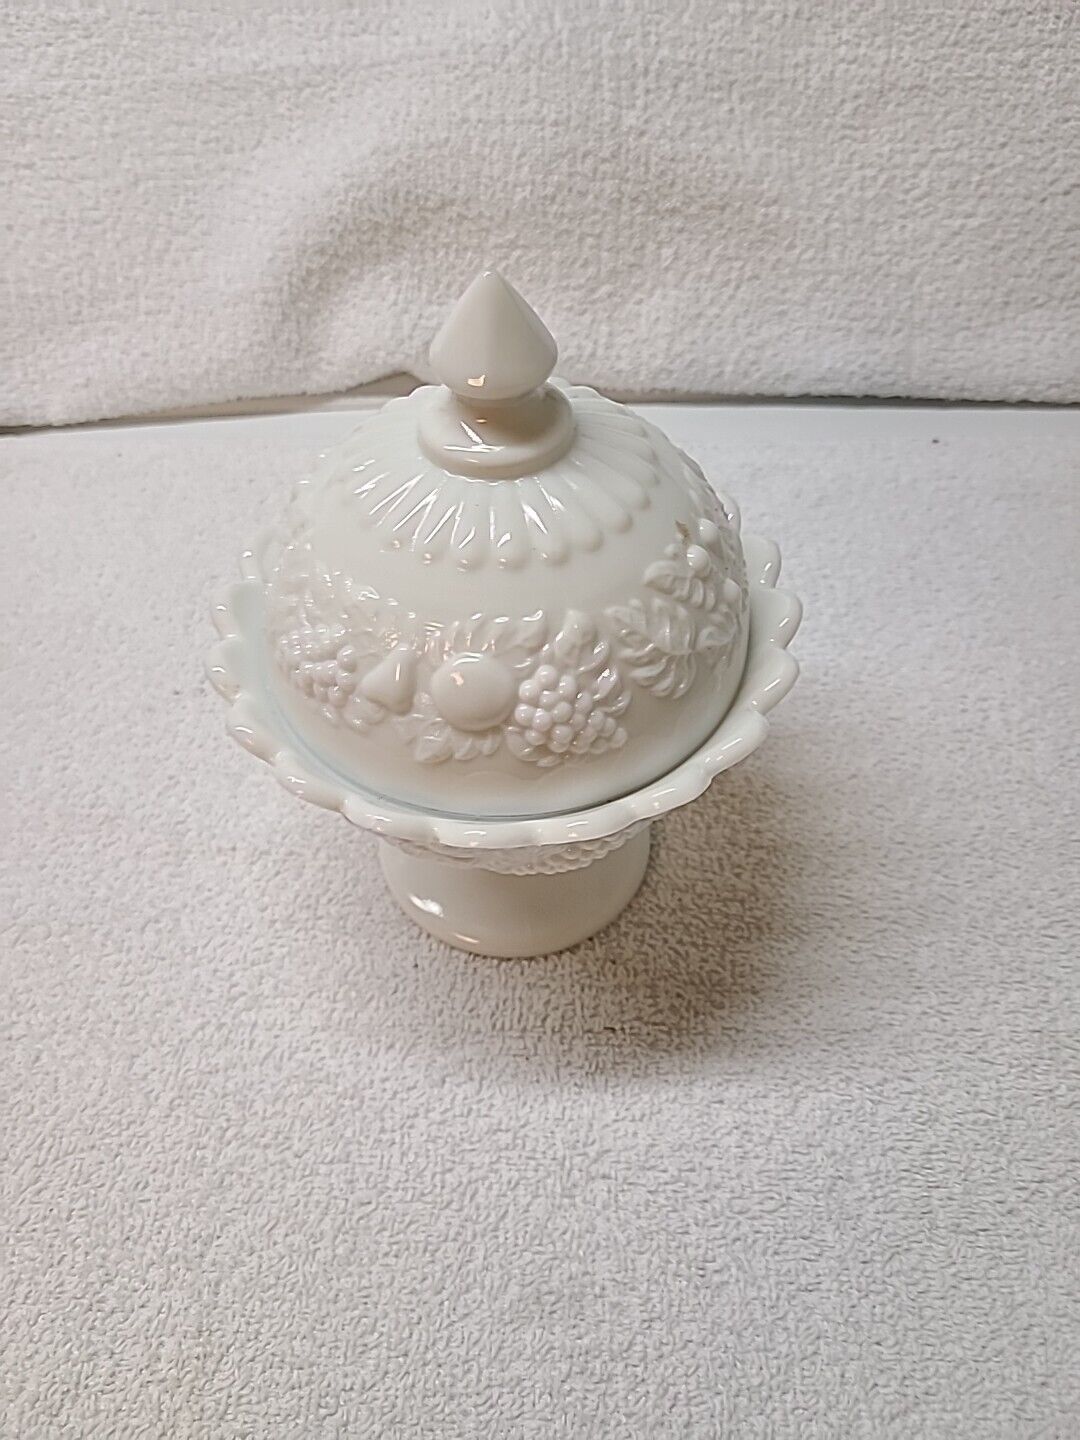 Vintage Westmoreland Milk Glass Covered Candy Dish With Grapes & Fruits Pattern